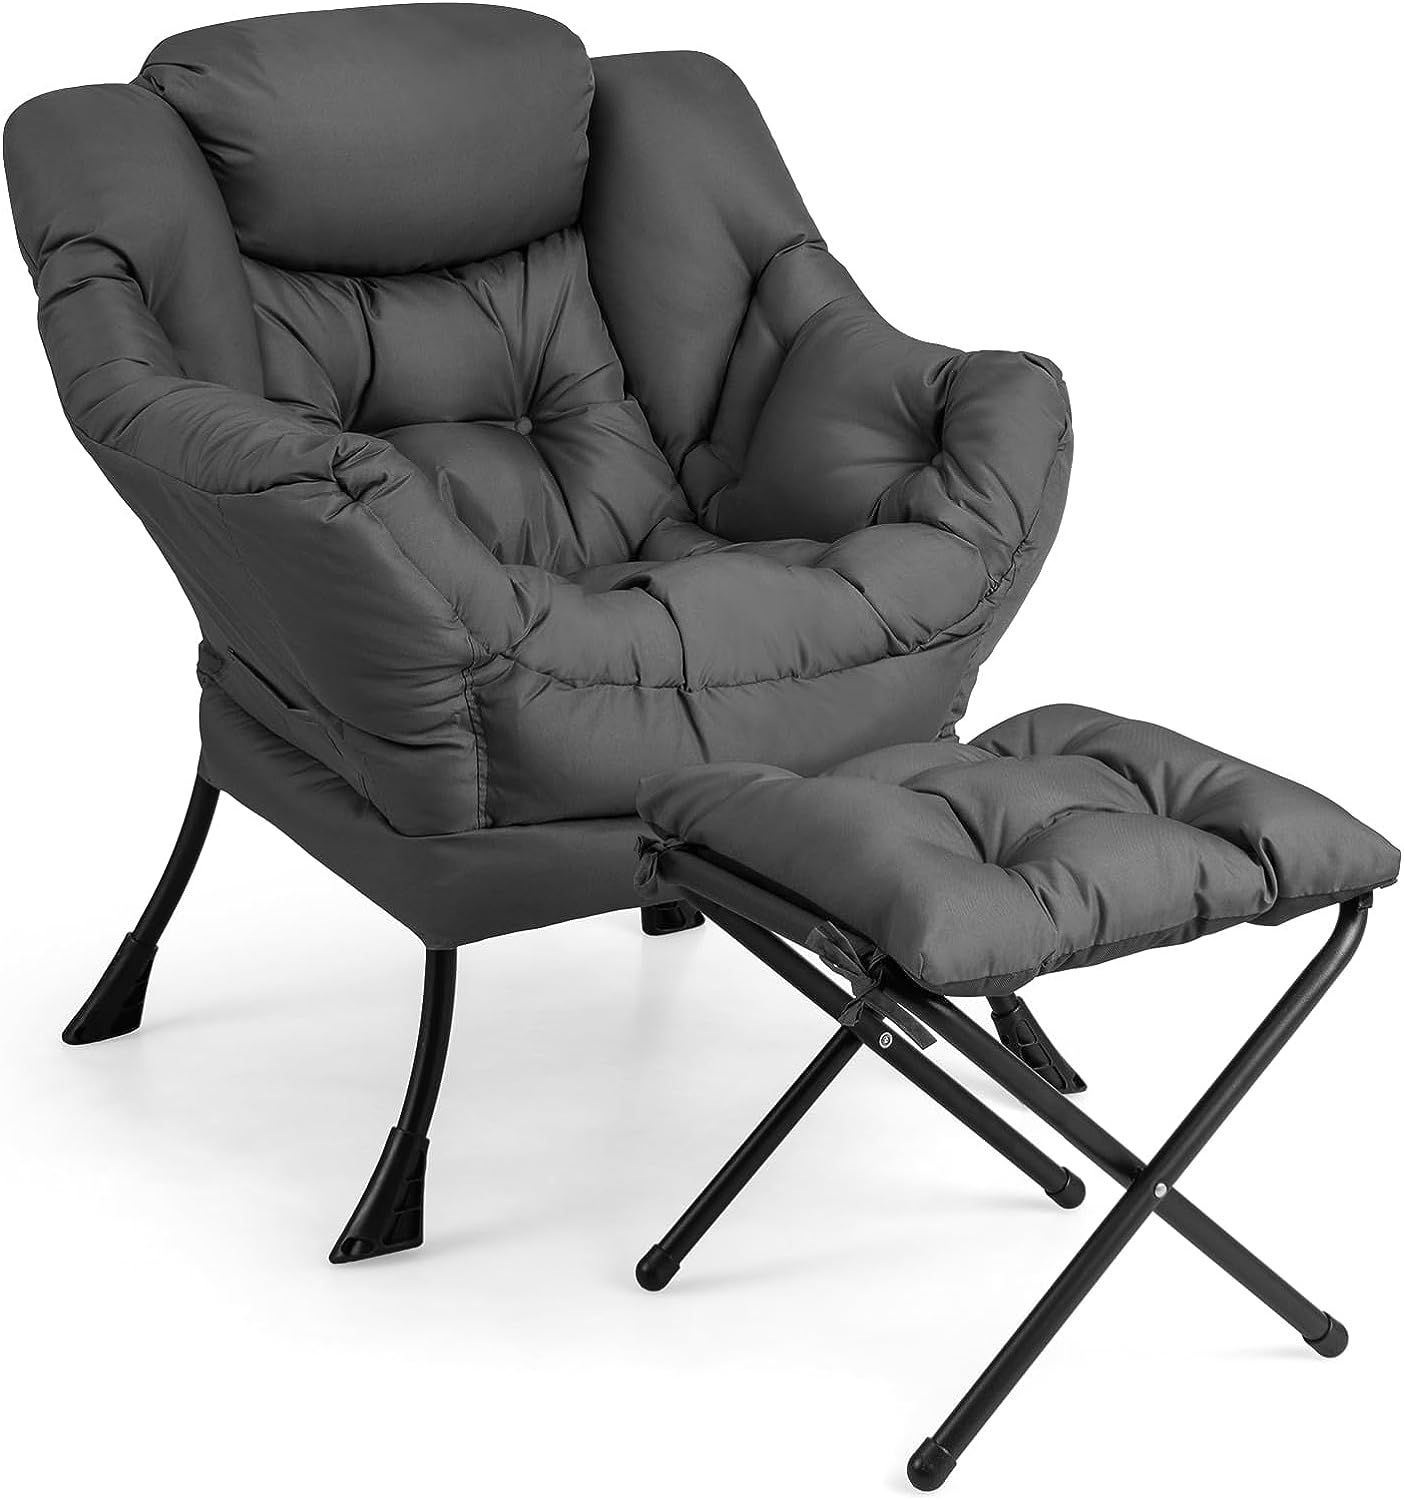 Modern Lazy Chair, Accent Contemporary Lounge Chair - Giantex